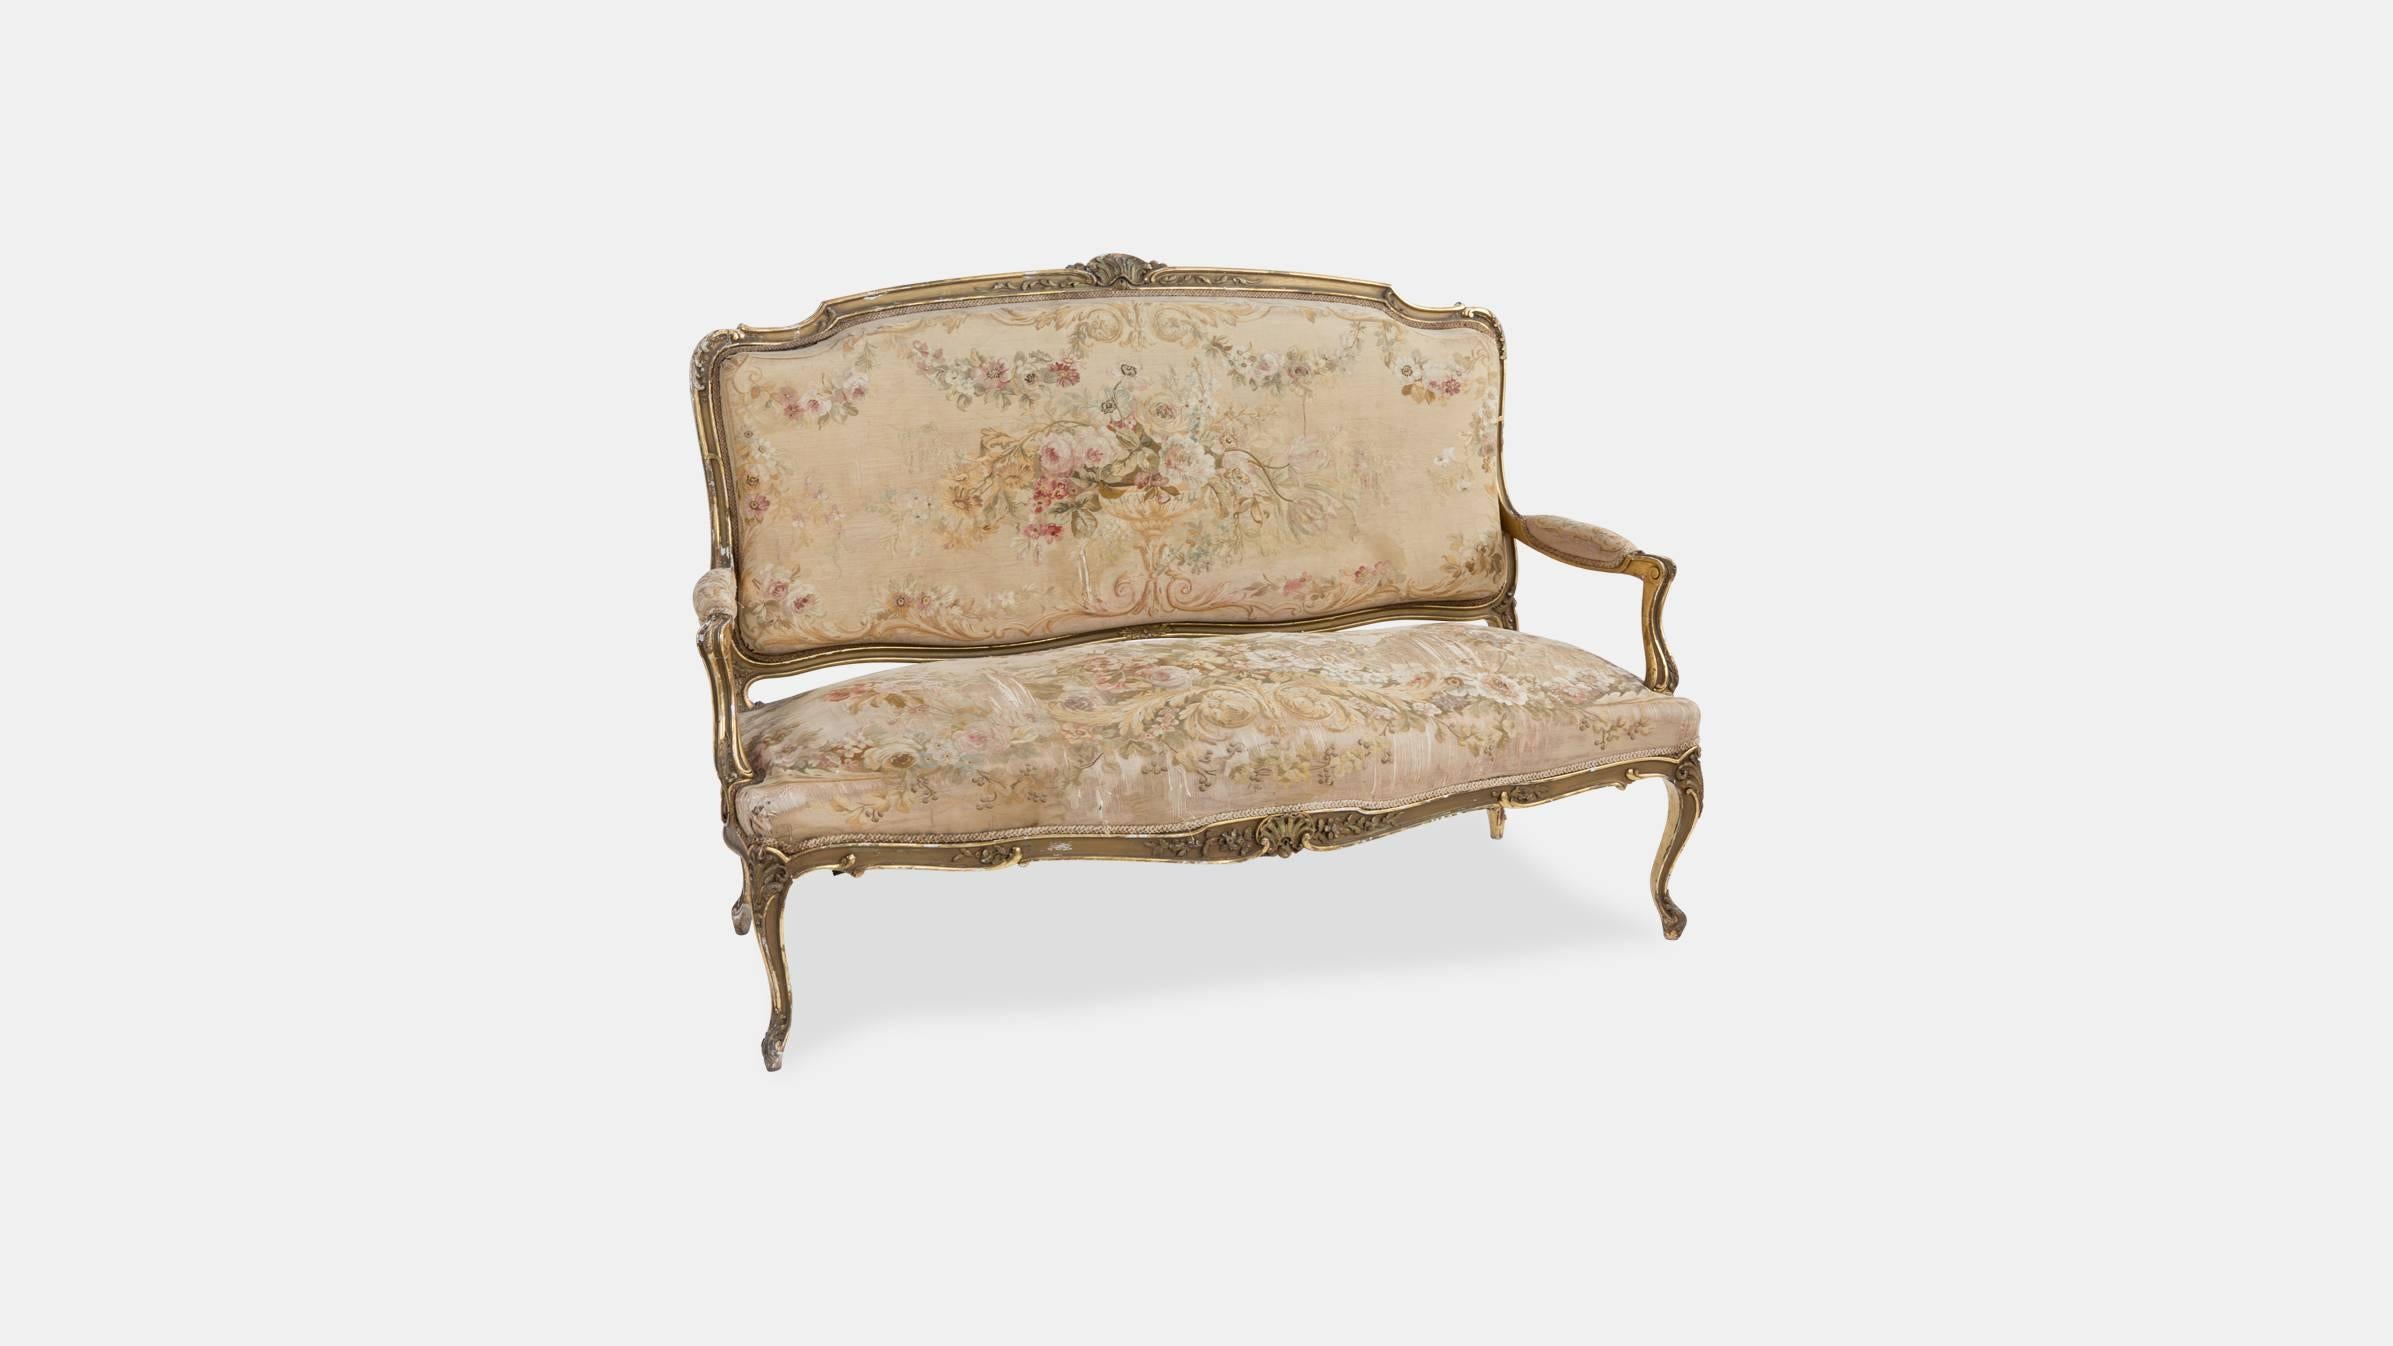 A beautiful antique carved giltwood Aubusson salon settee carved with rocaille and scallop shells on cabriole and scrolled feet.

Upholstered in a beautifully aged floral tapestry.